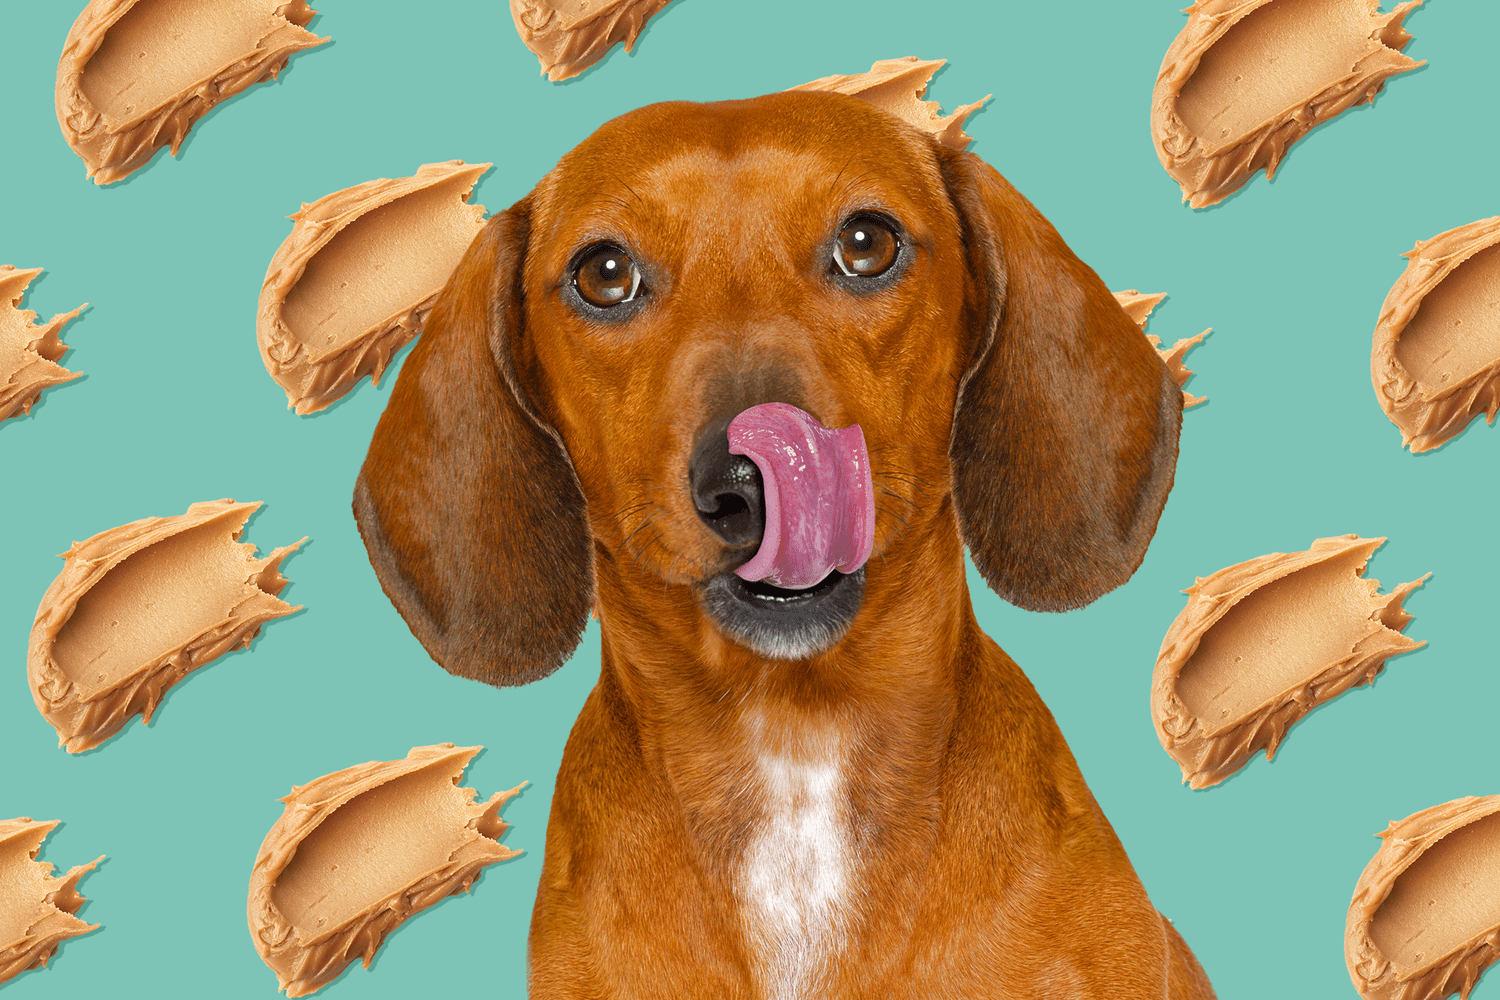 Can Dogs Have Peanut Butter?